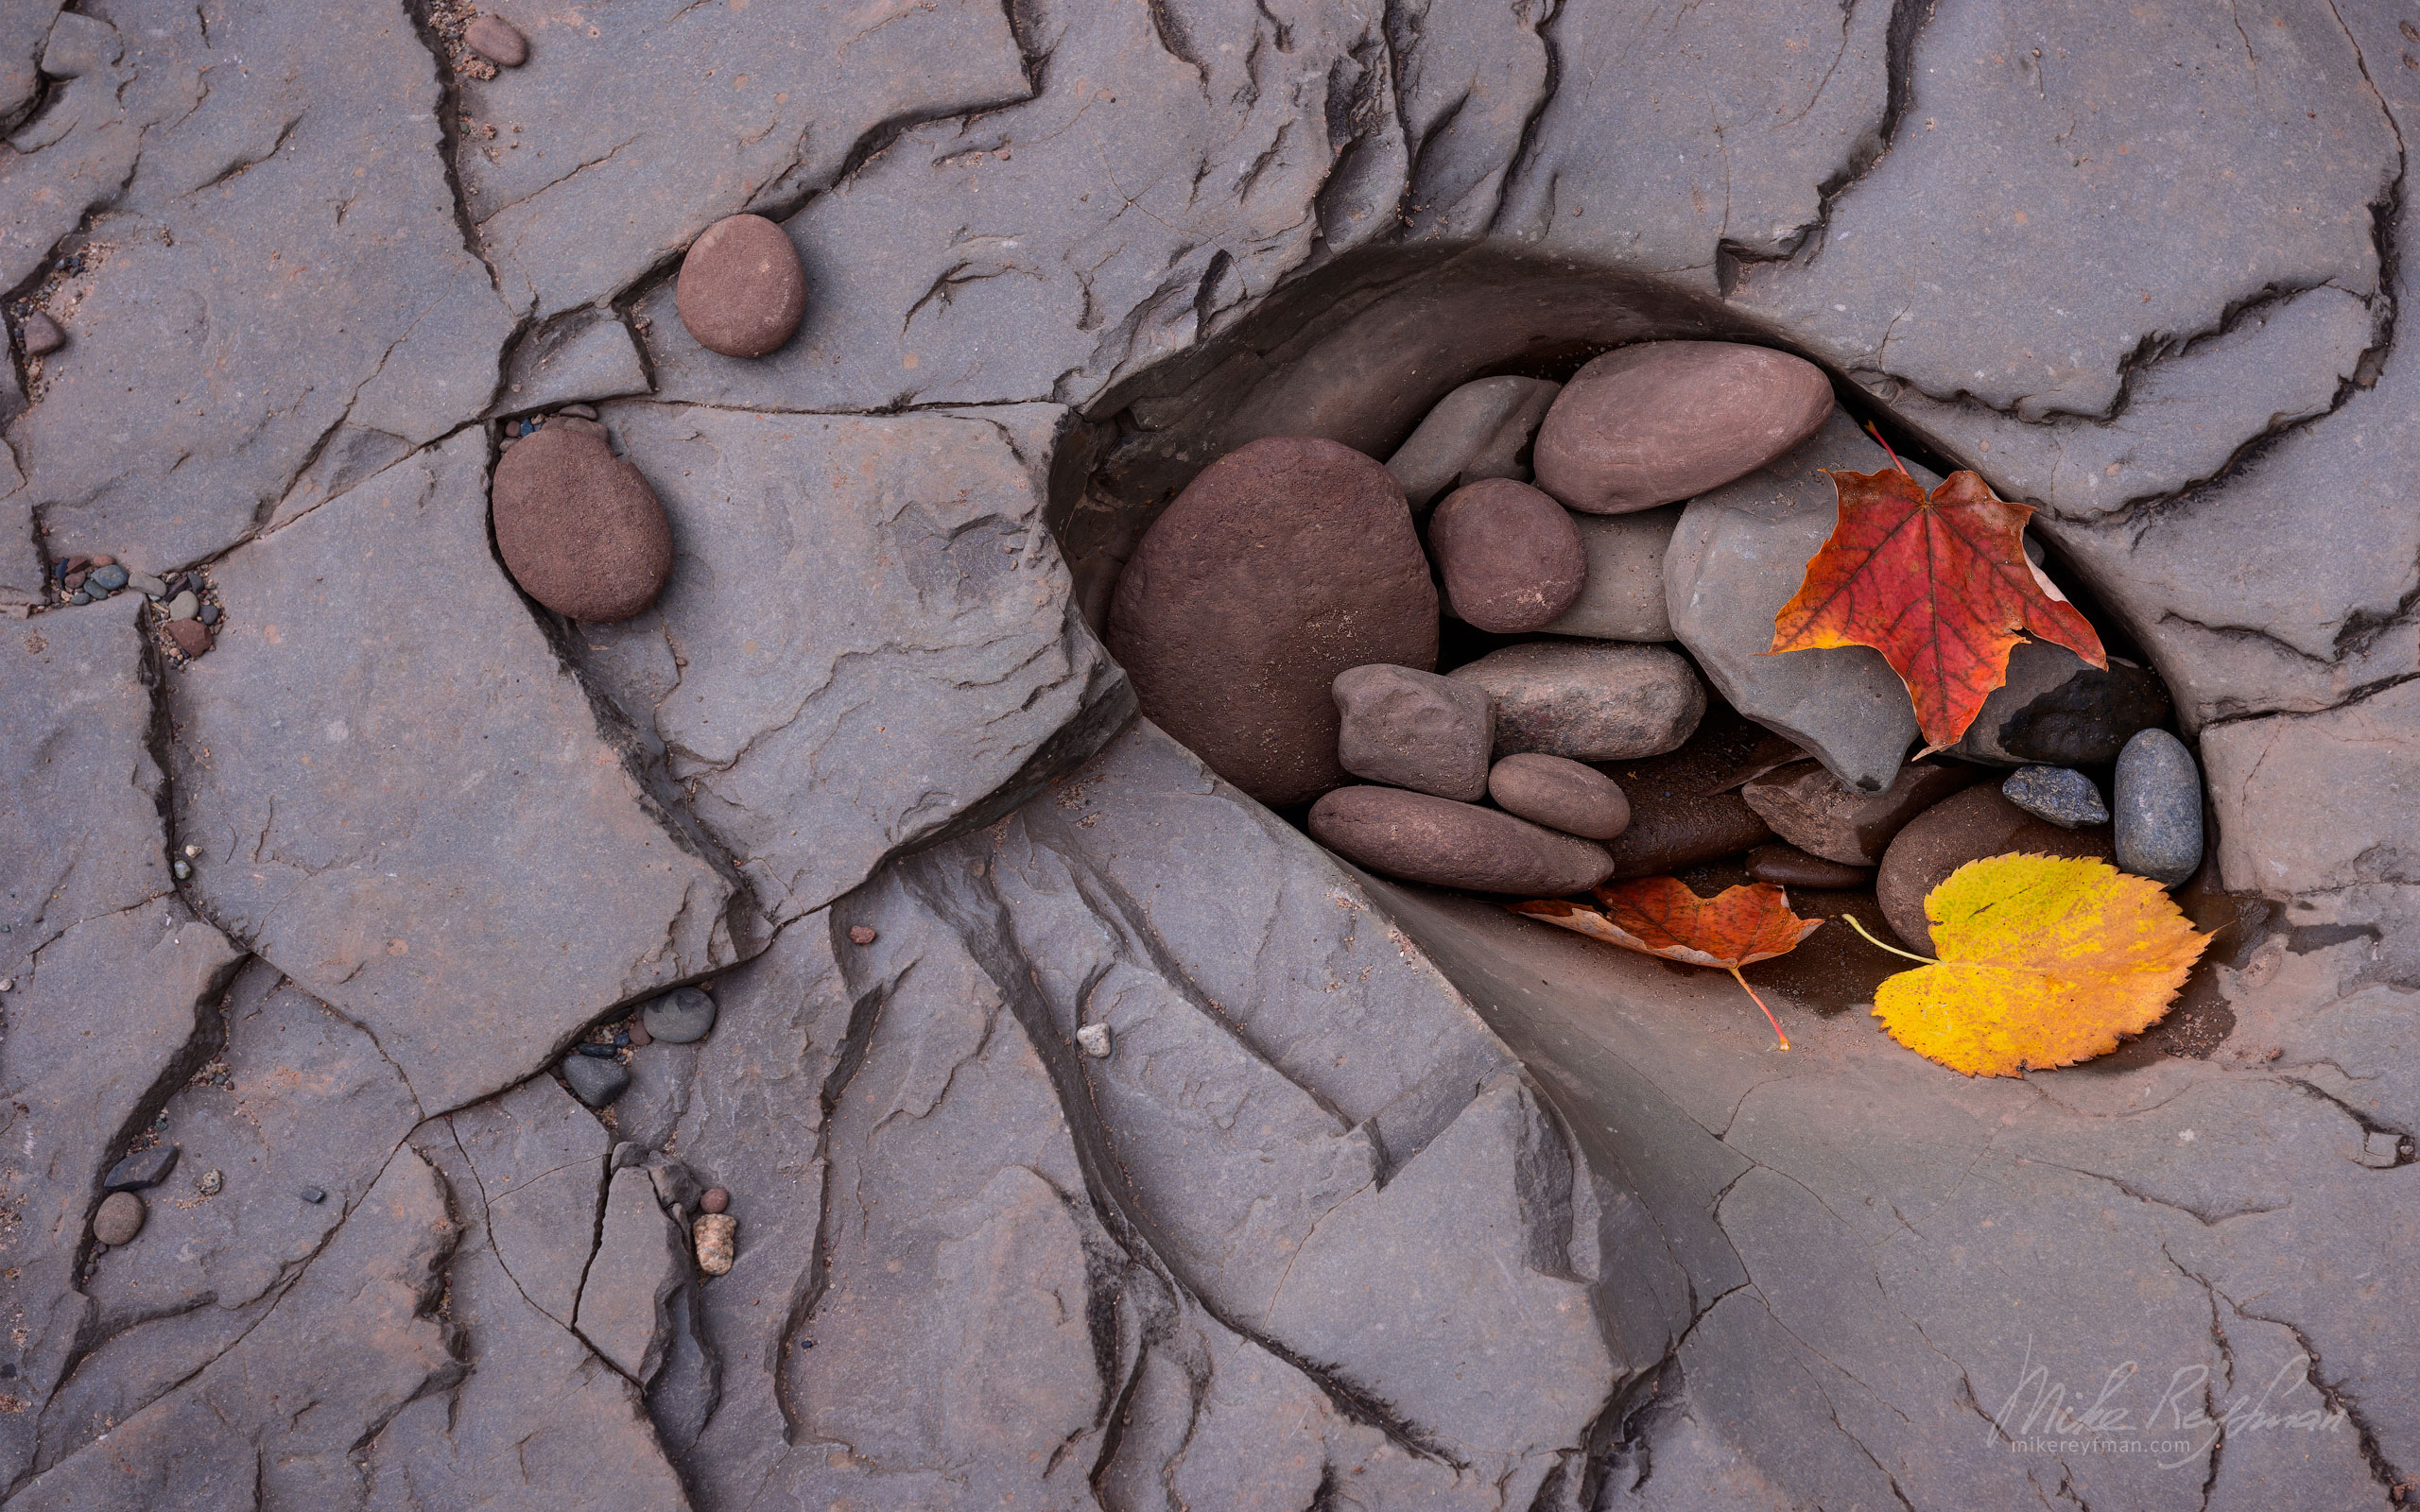 Pebbles and fall leaves in the bedrock pothole of Big Iron River at Bonanza Falls. Porcupine Mountains, Upper Peninsula, Michigan, USA. UP-MI_052_ZRA6962.jpg - Michigan's Upper Peninsula - the best destination in US for fall colors. - Mike Reyfman Photography